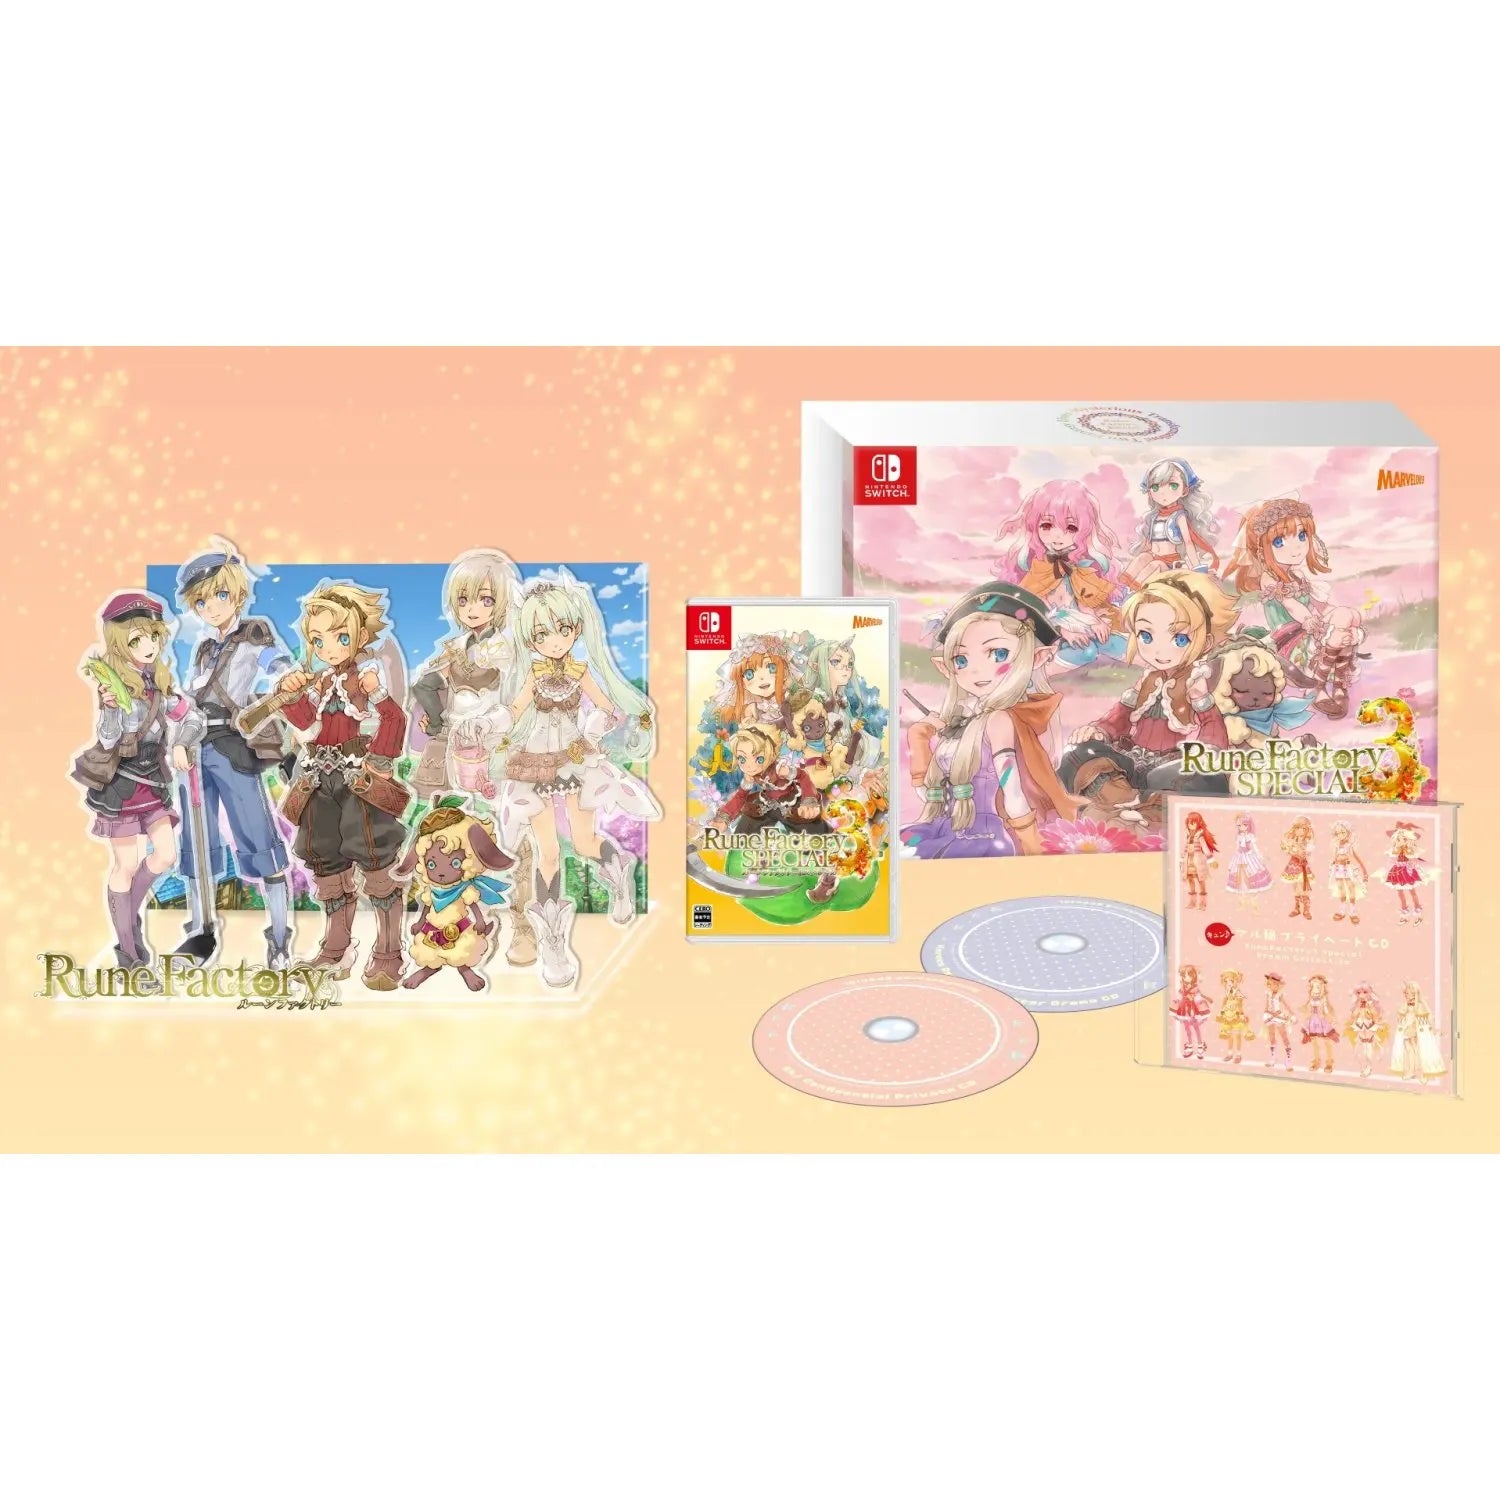 NSW Rune Factory 3 Special (Chinese)